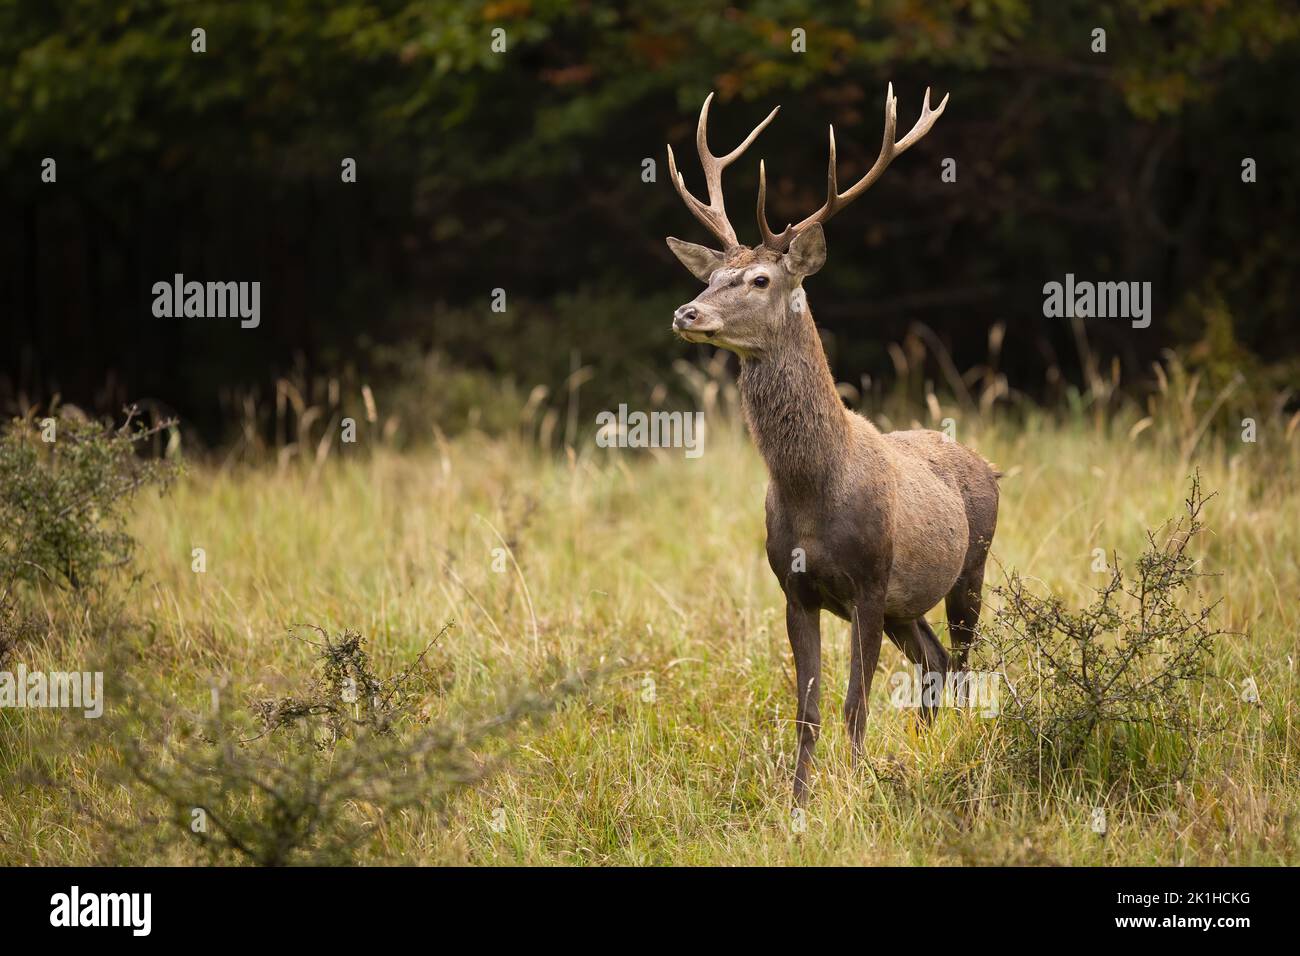 Red deer sniffing with nose and stretching neck in attentive pose on a glade Stock Photo